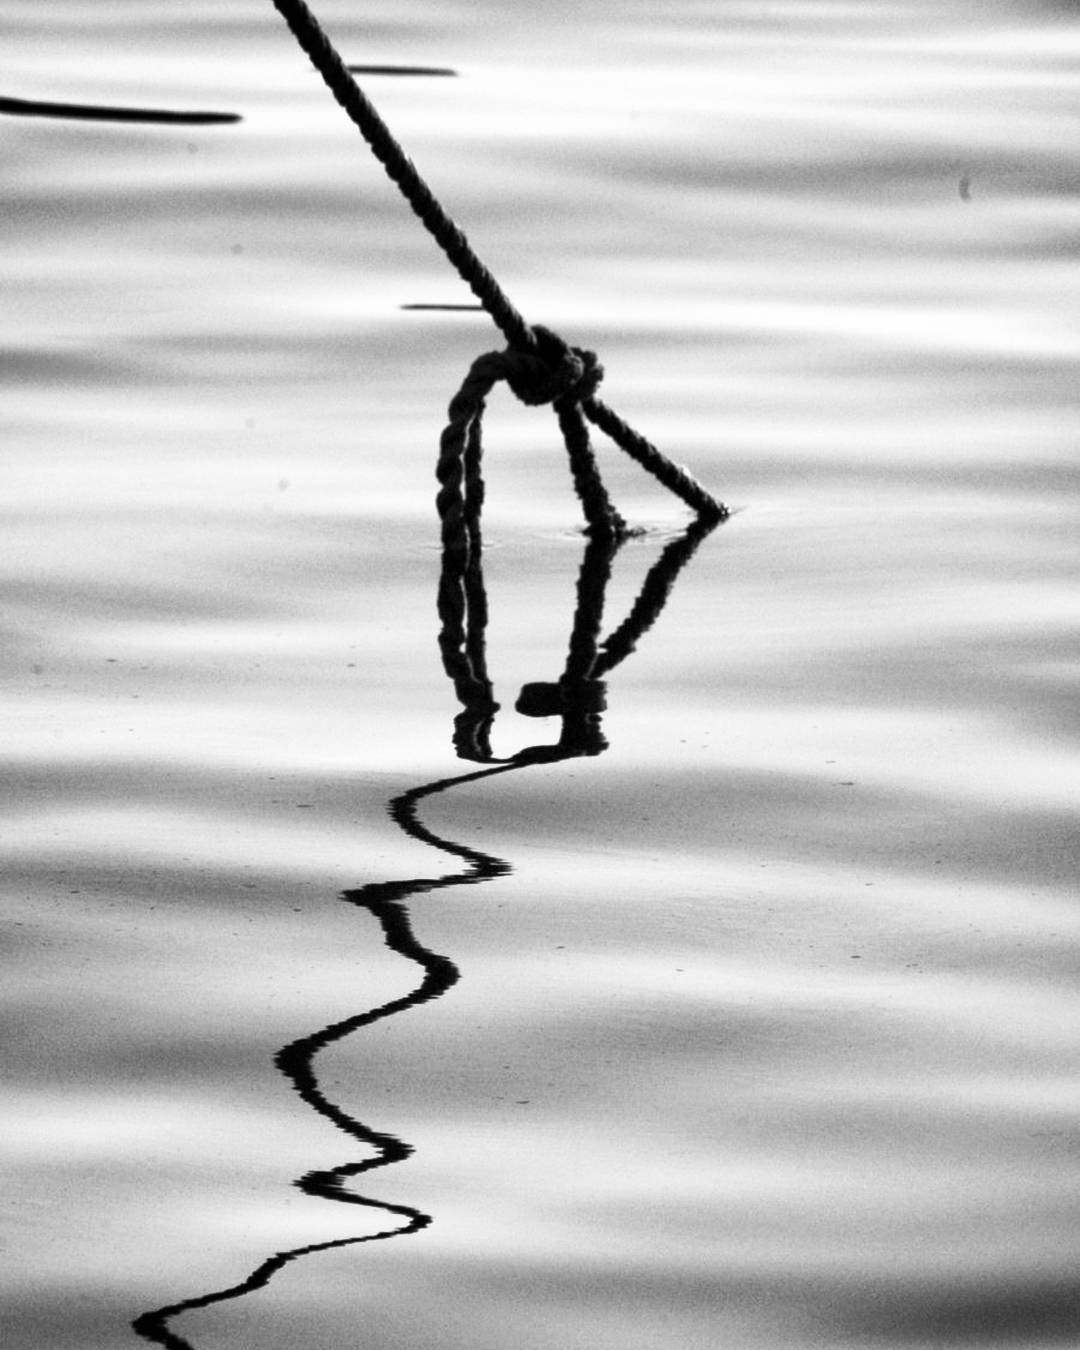 Besides hanging oneself a  rope can be used as a  ... more monochrome photography at http://bnw.alahay.org